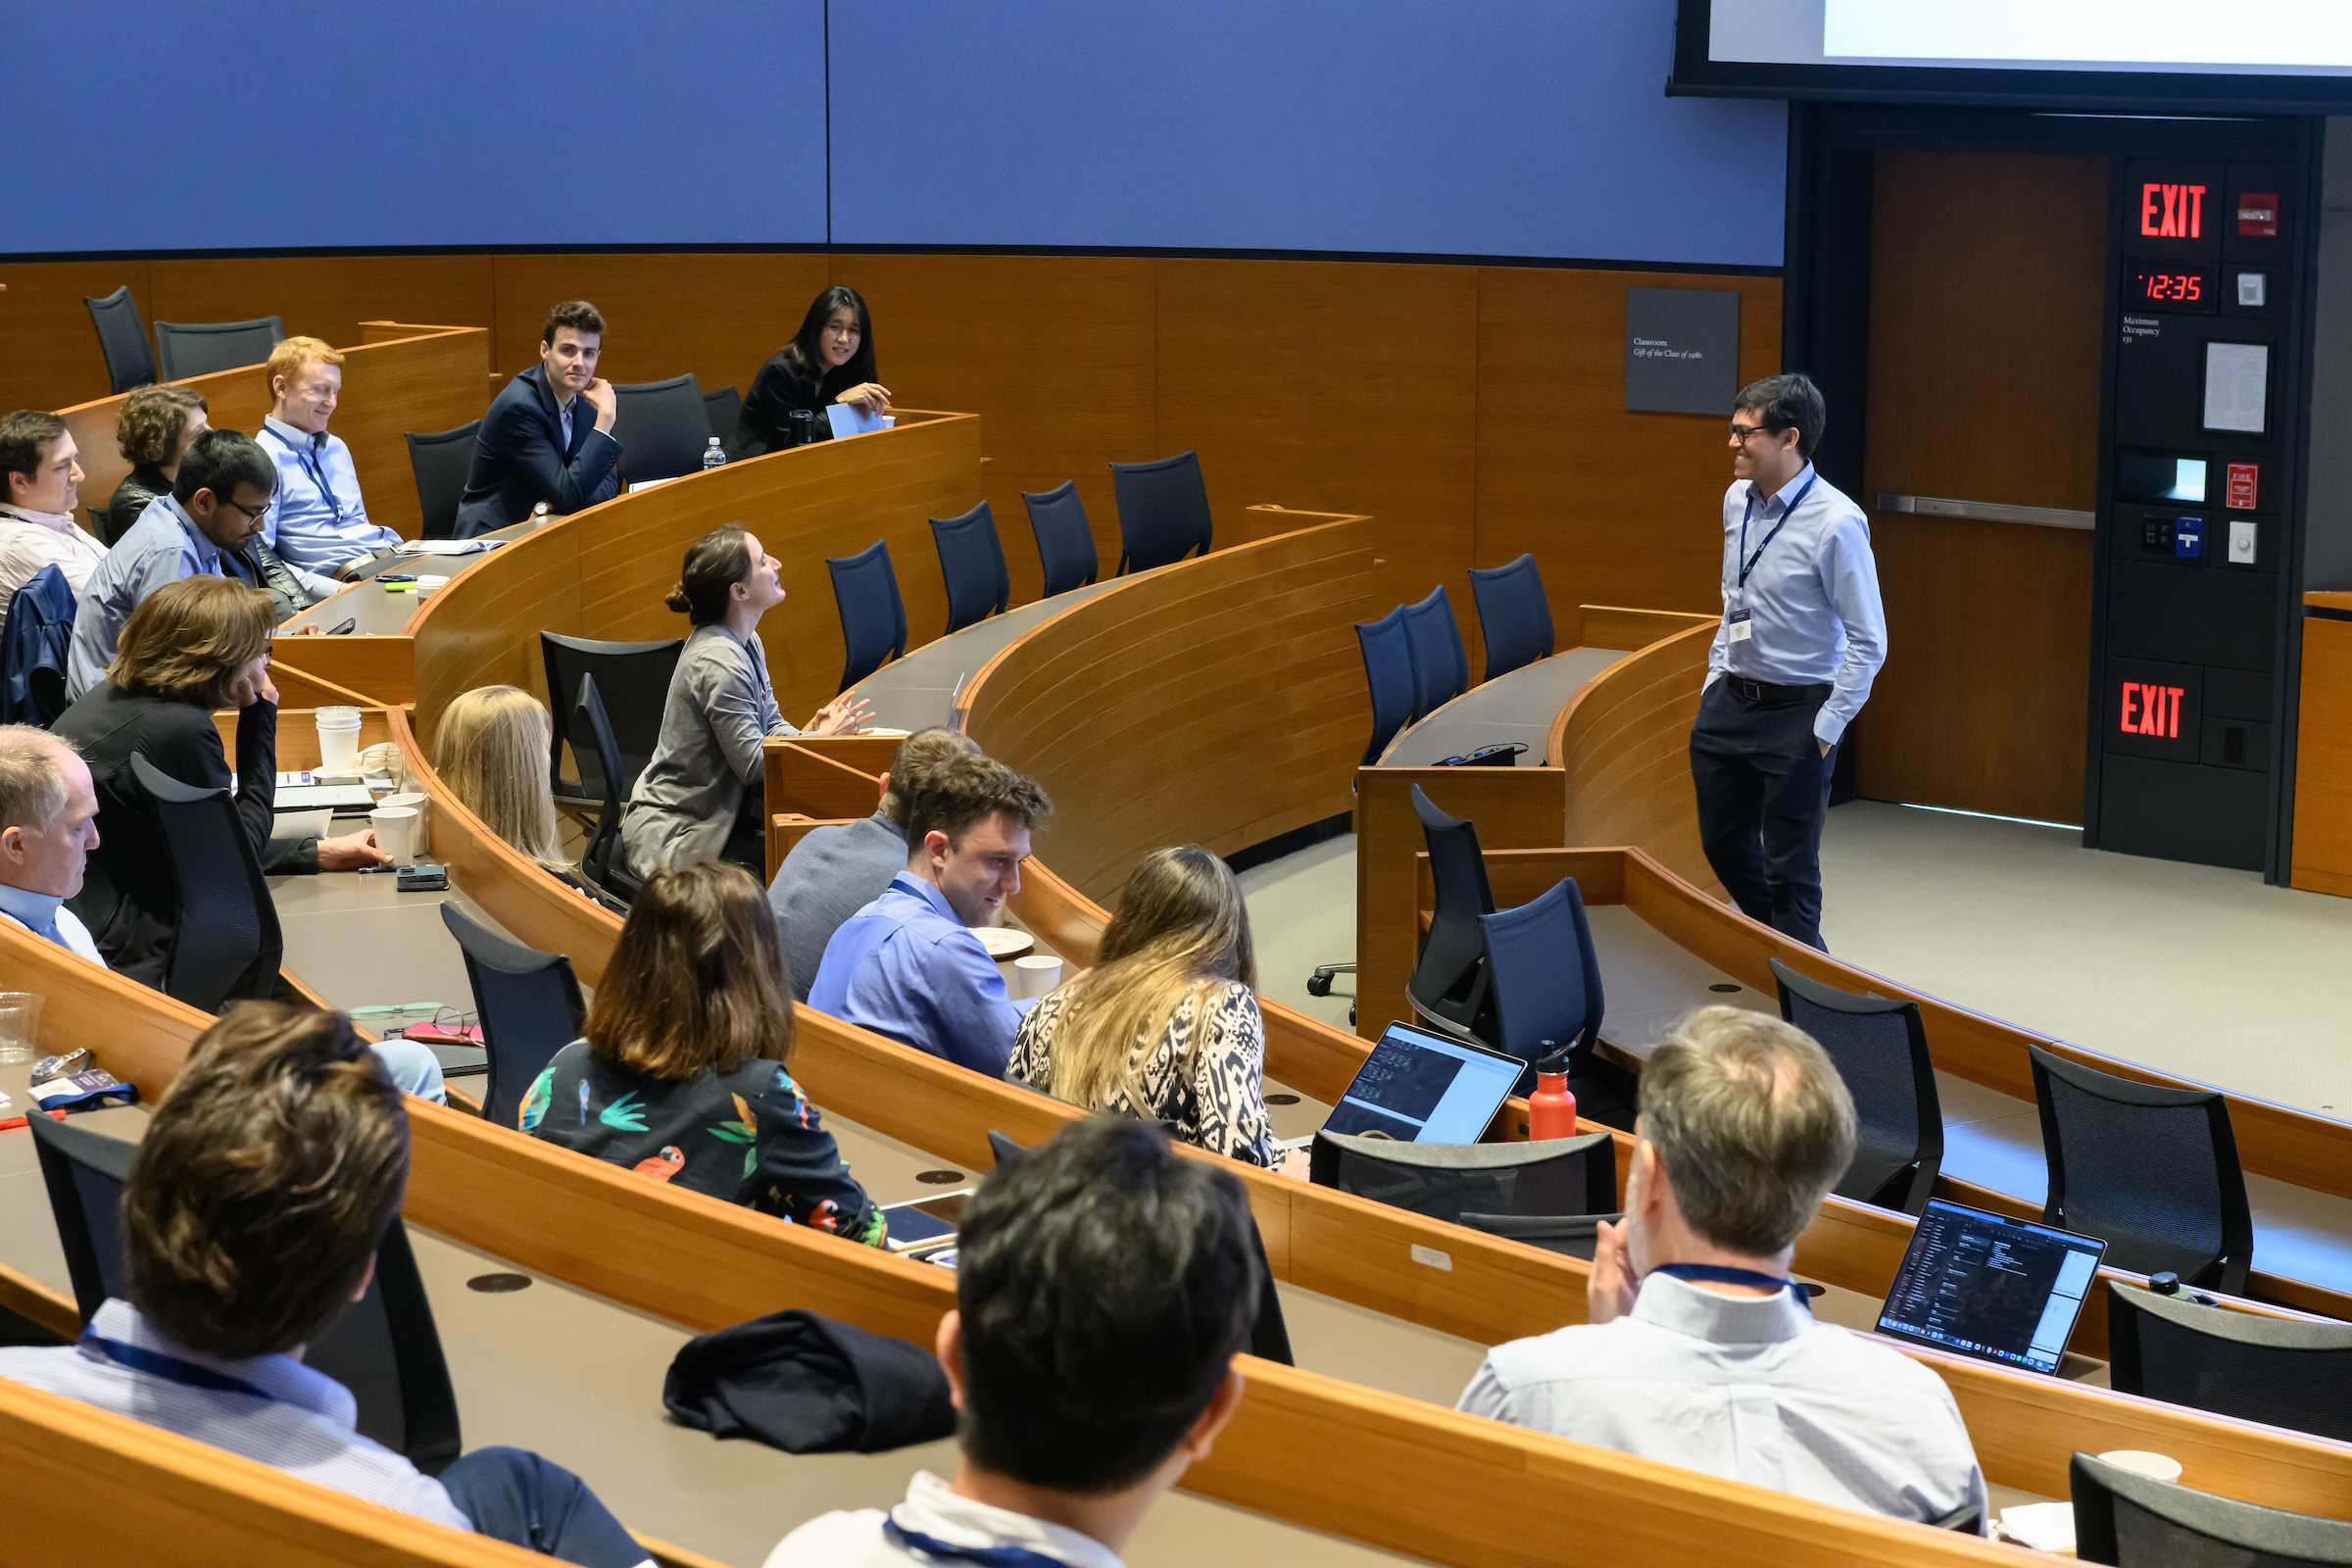 Juan Camilo Castillo (University of Pennsylvania) engaging with attendees at the Models & Measurement Conference